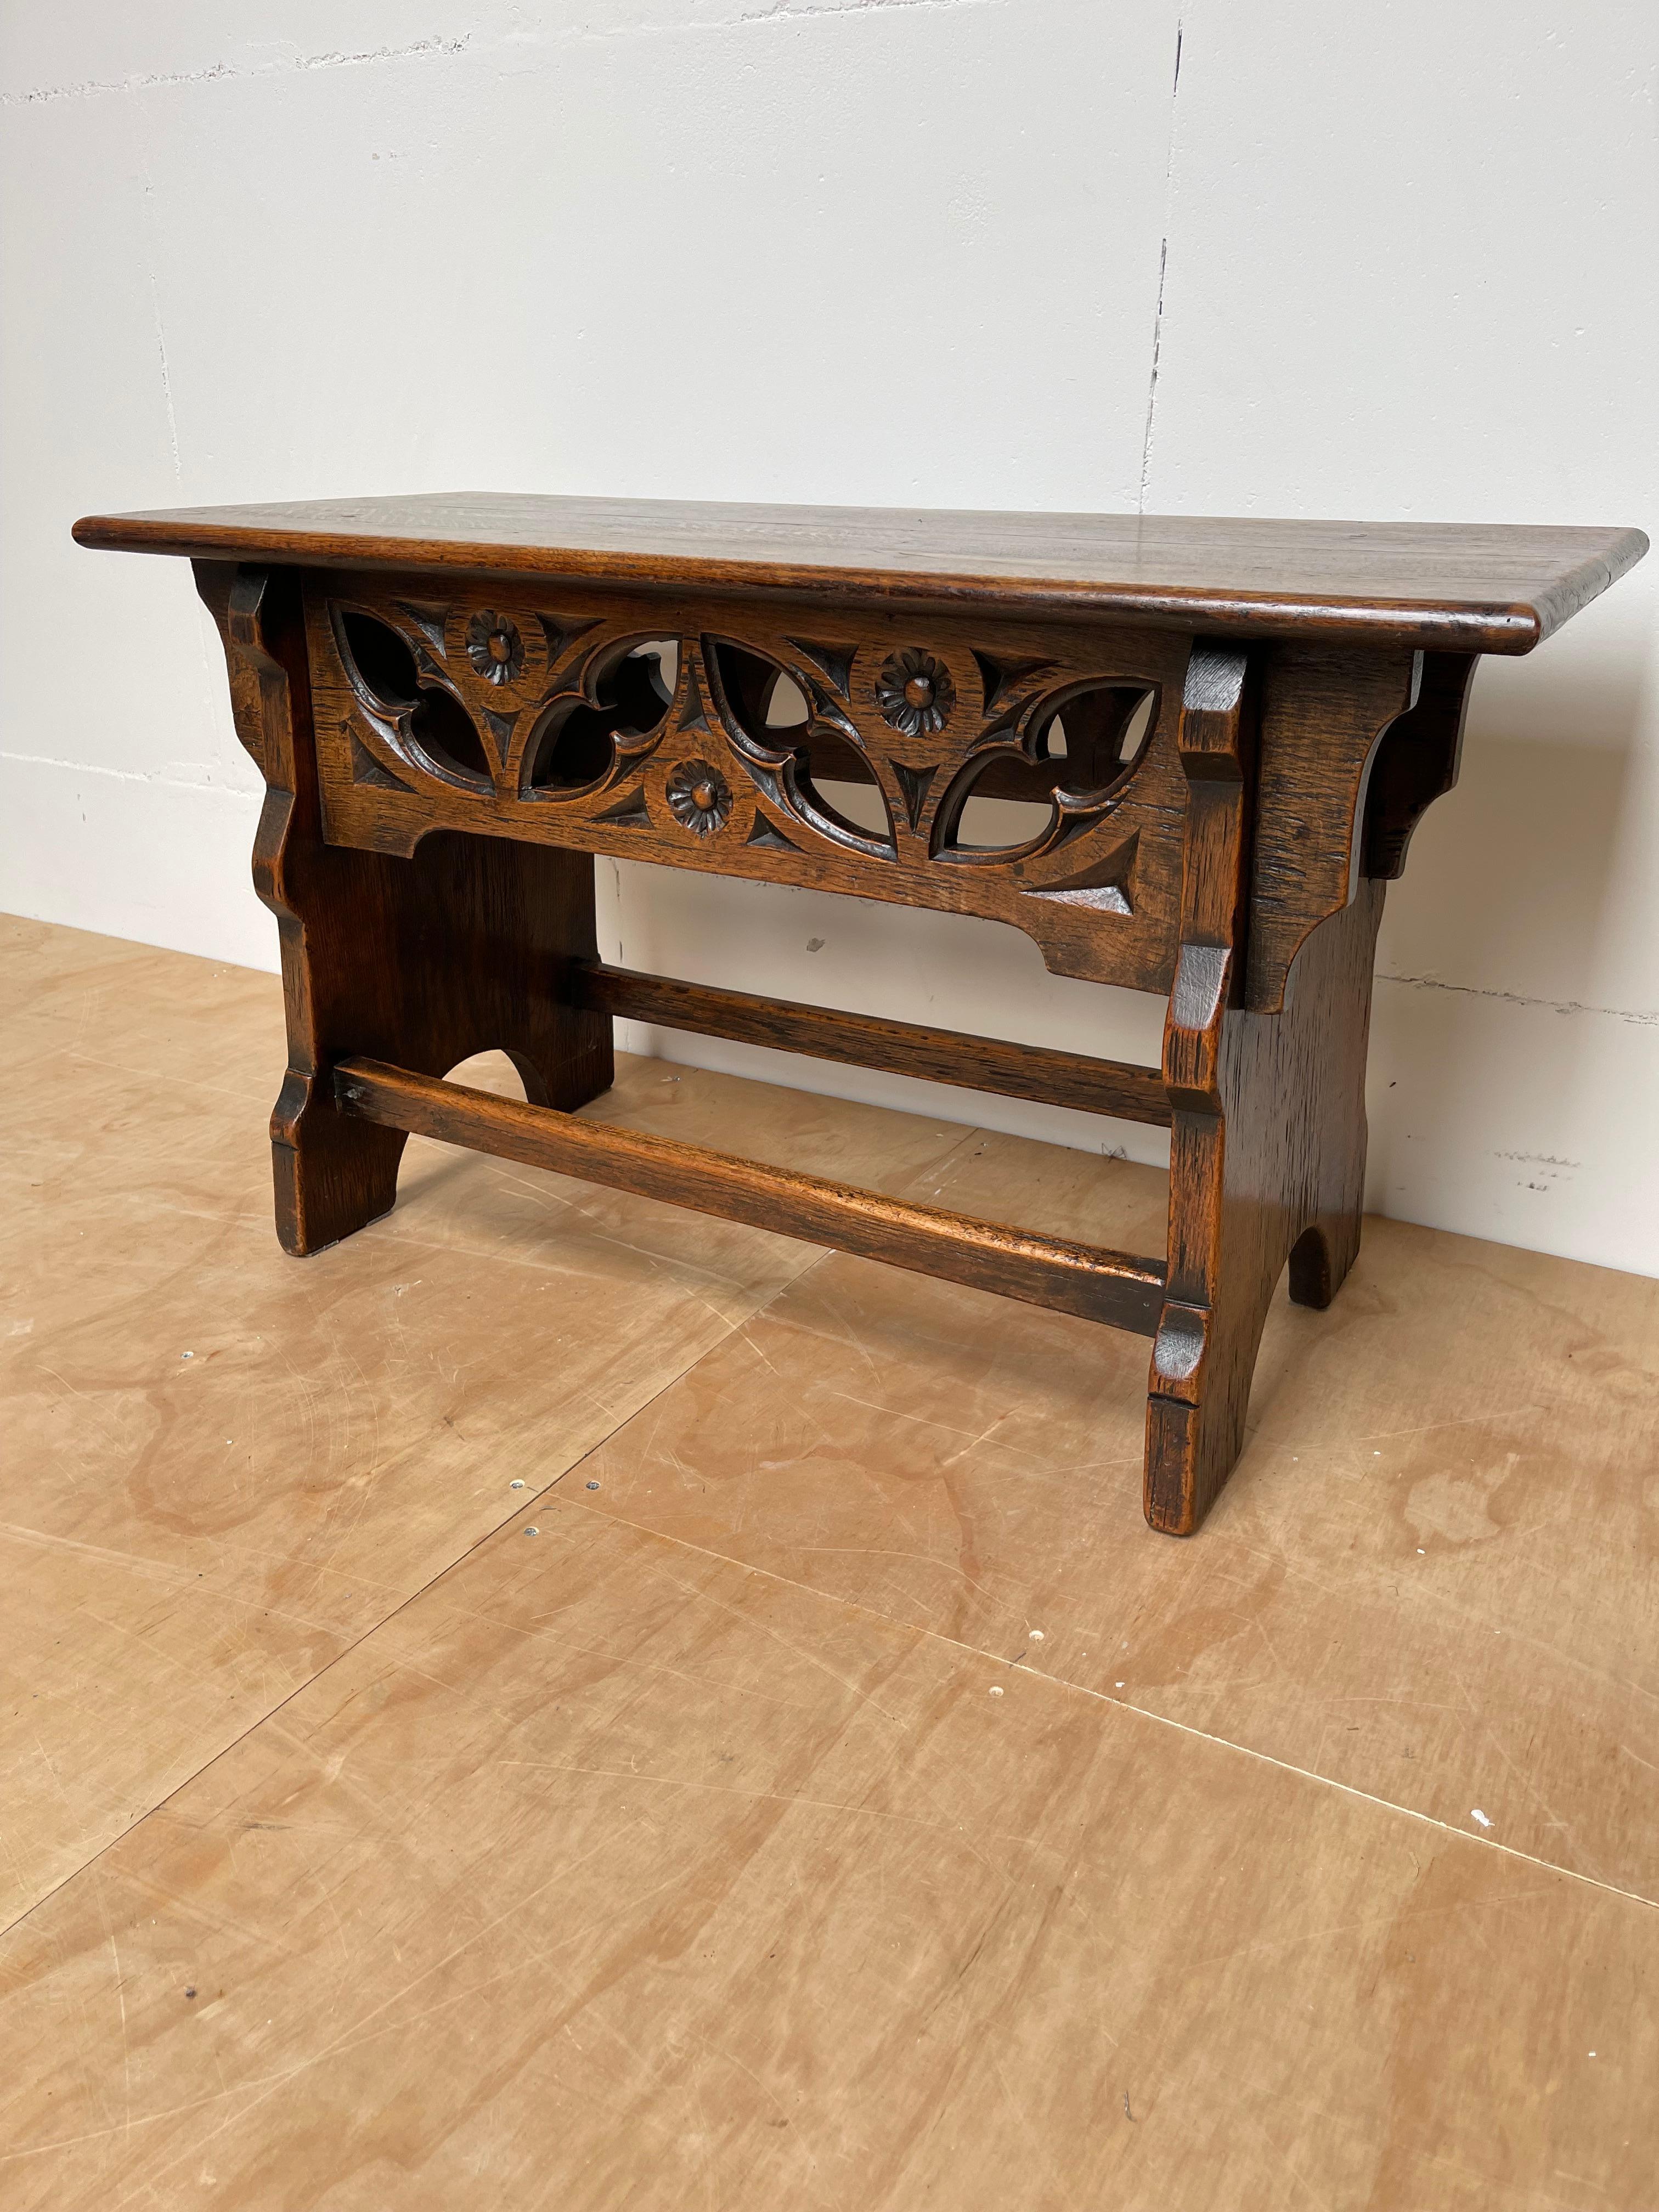 Unique, practical and highly decorative seat / hall bench with quality carvings.

This beautifully carved and striking stool is surrounded by a number of very well designed and executed Gothic elements. Combined with the marvellous patina, it makes